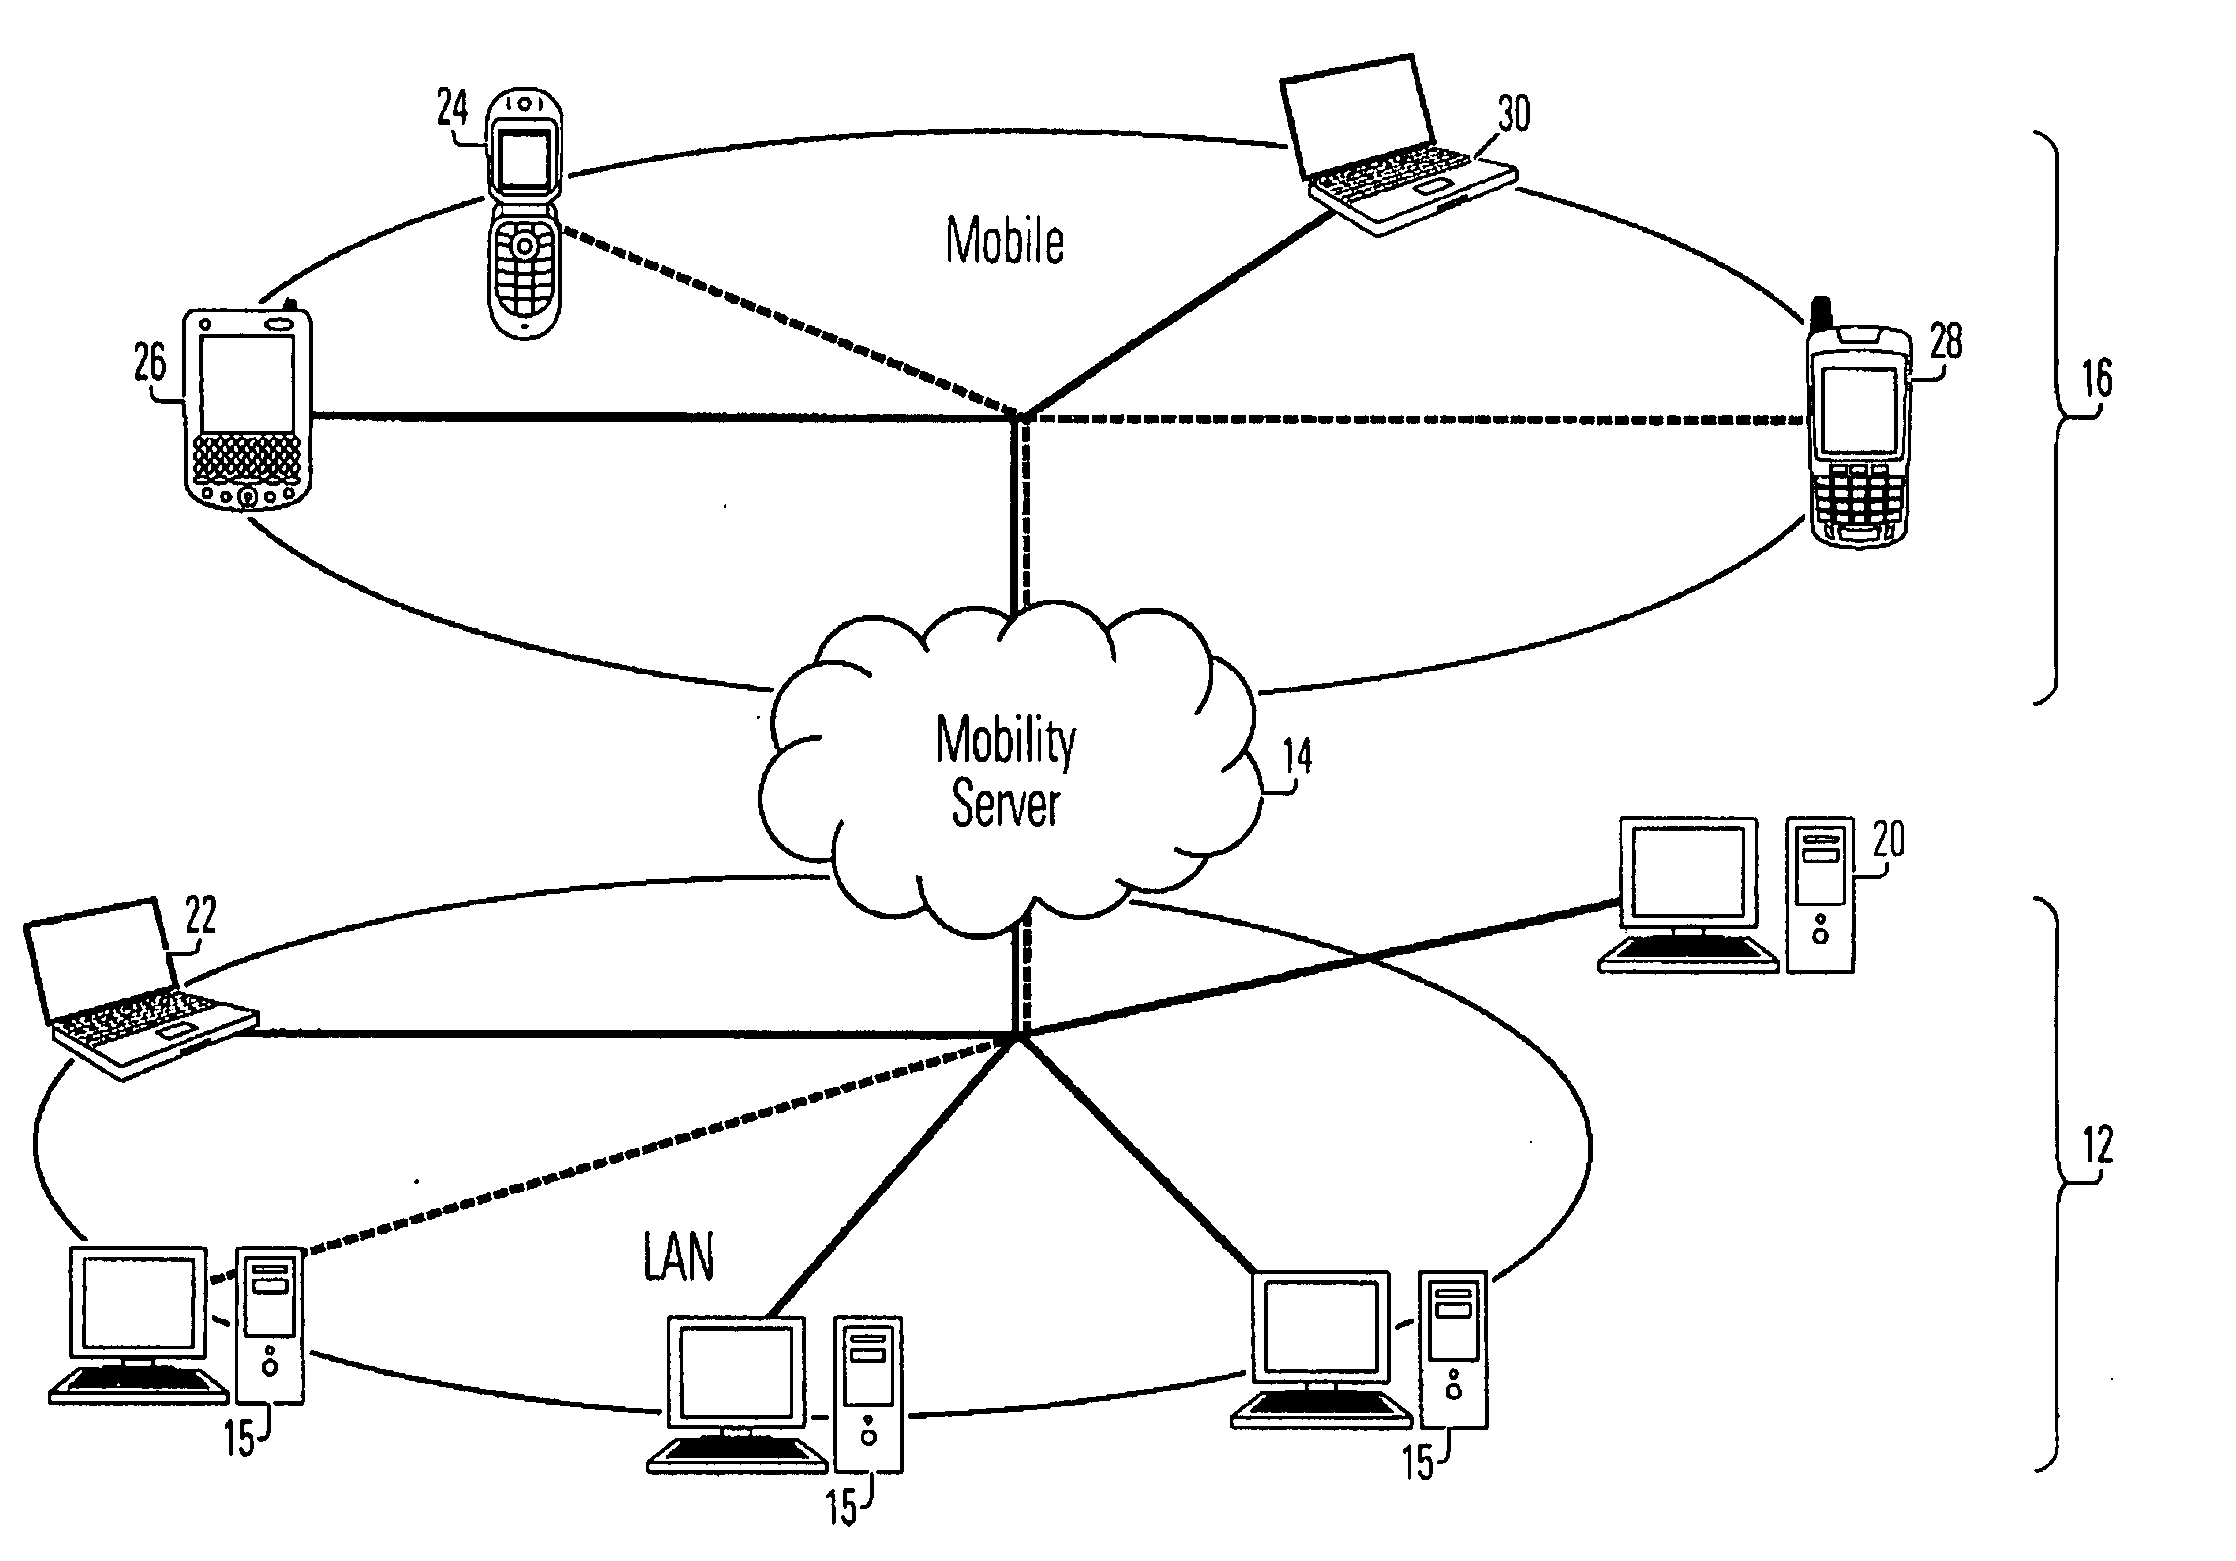 Network adapted for mobile devices